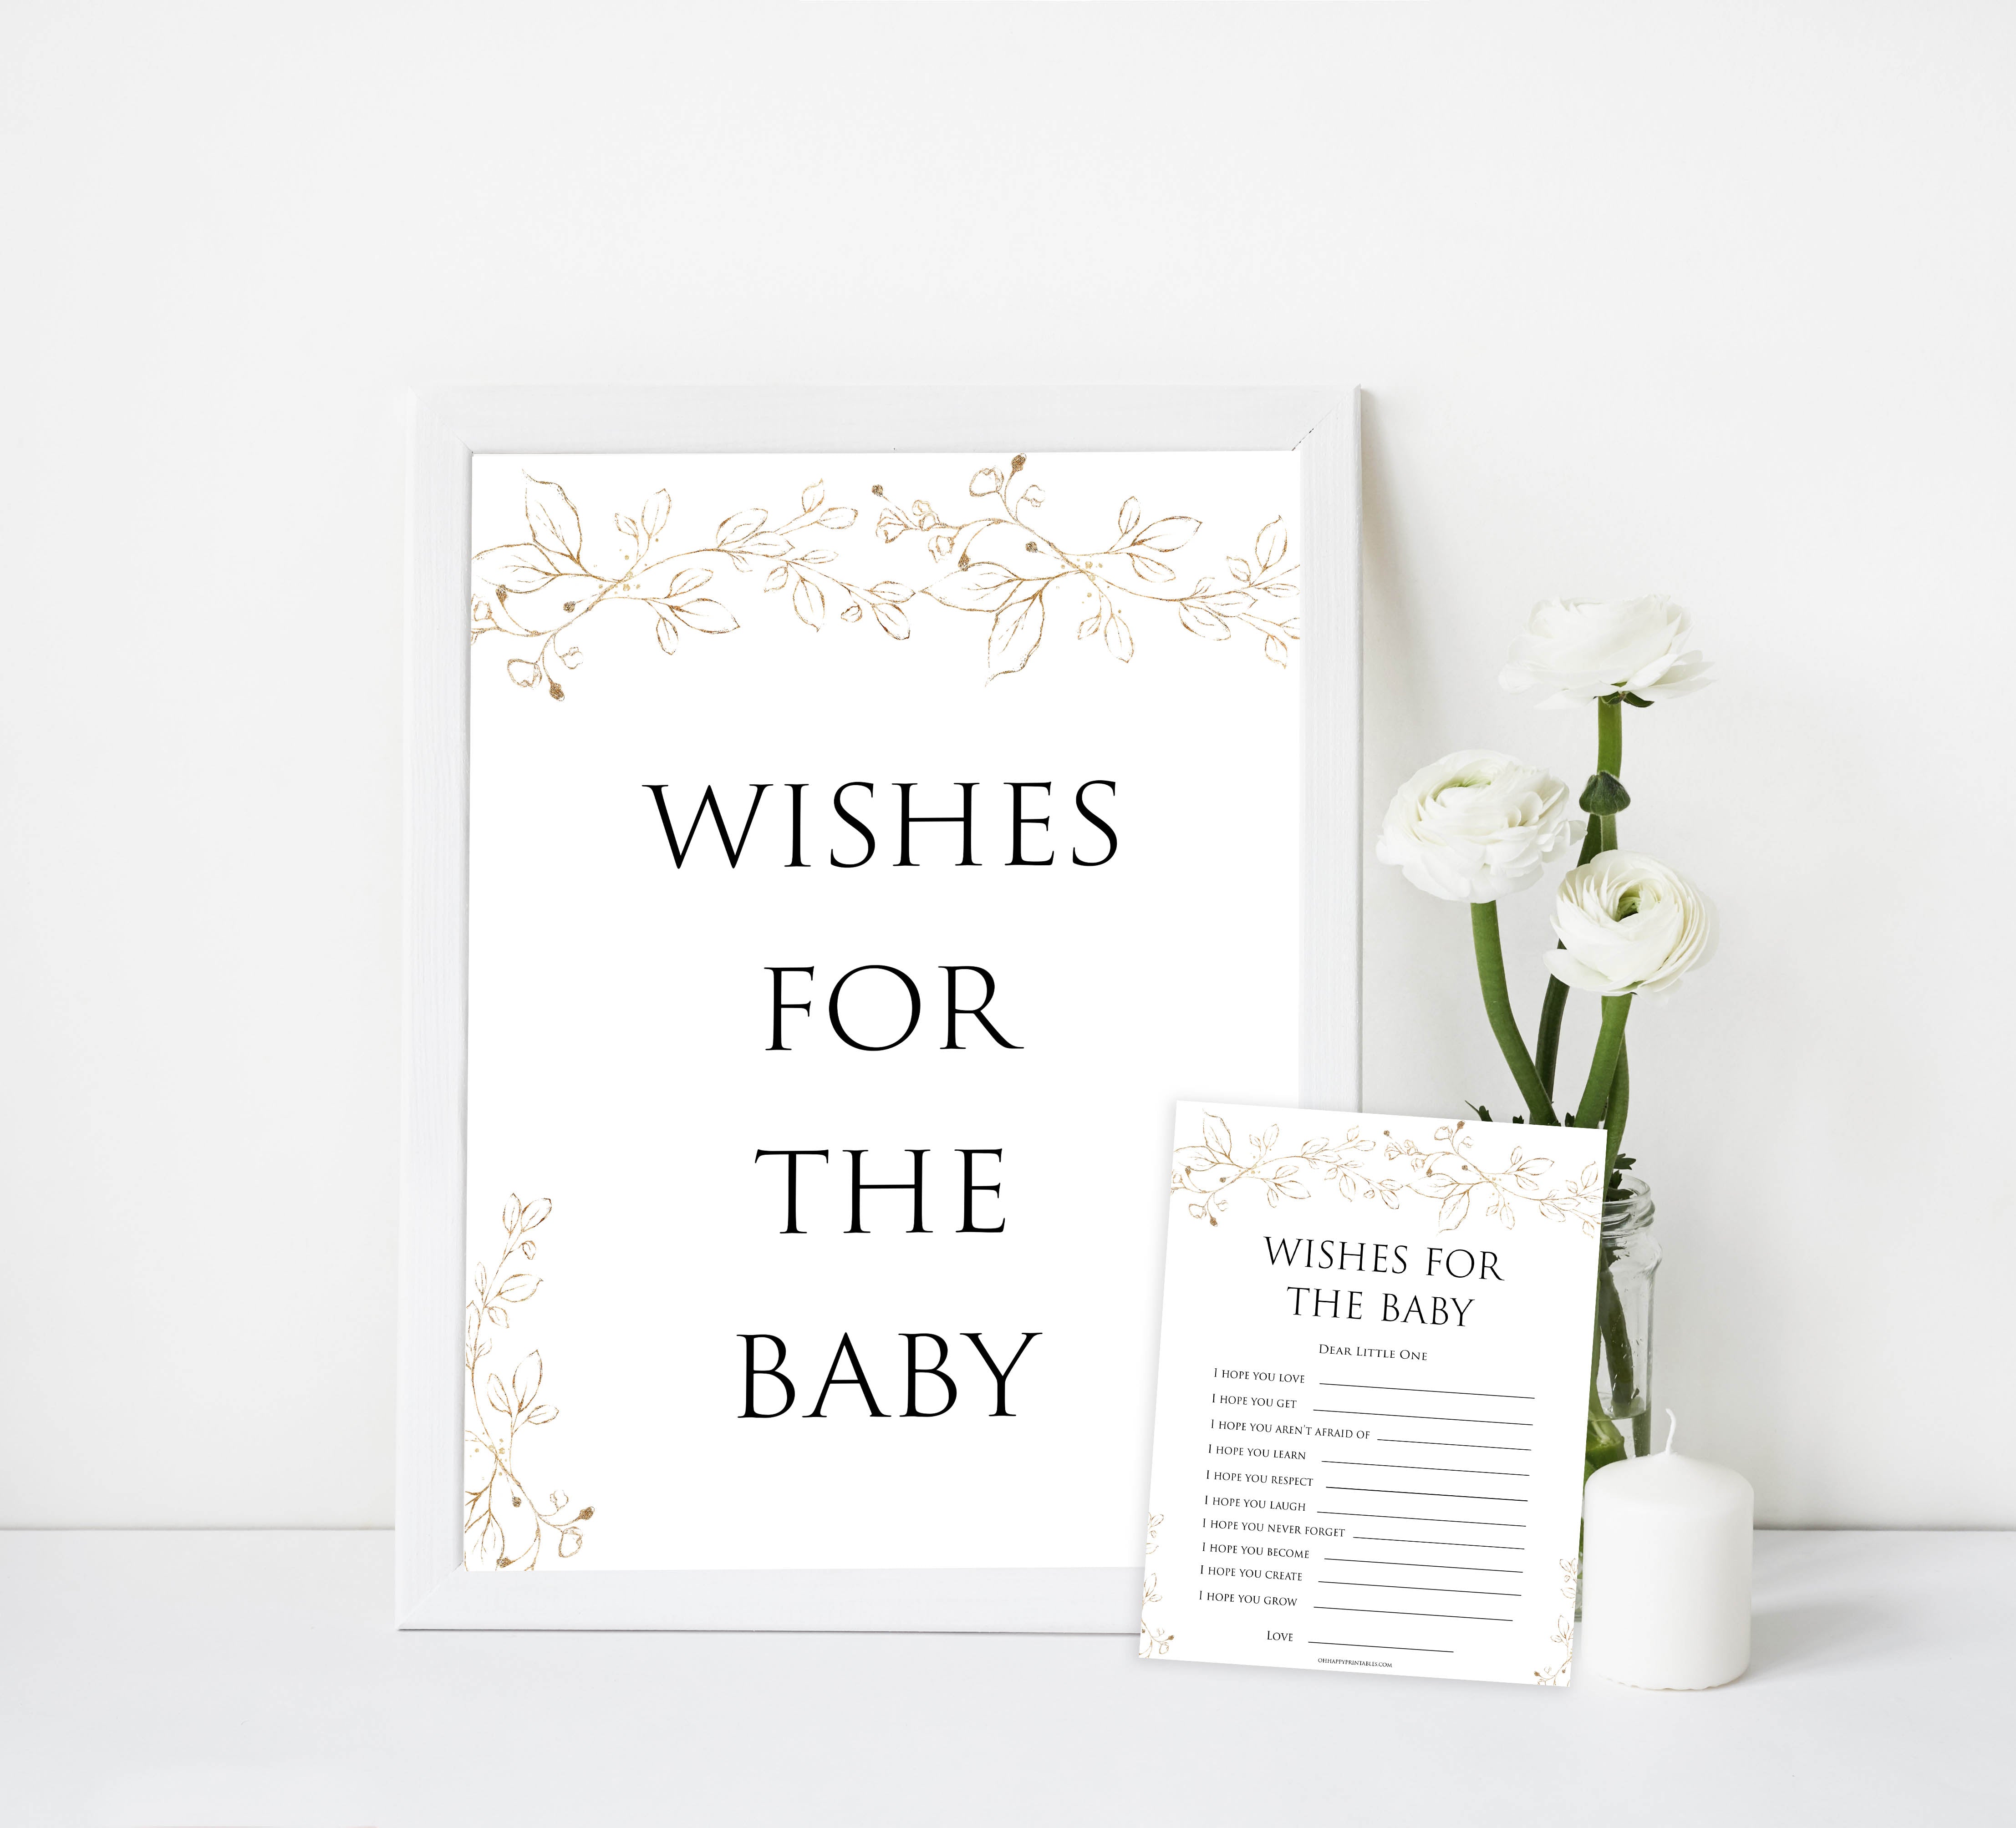 wishes for the baby keepsake, Printable baby shower games, gold leaf baby games, baby shower games, fun baby shower ideas, top baby shower ideas, gold leaf baby shower, baby shower games, fun gold leaf baby shower ideas